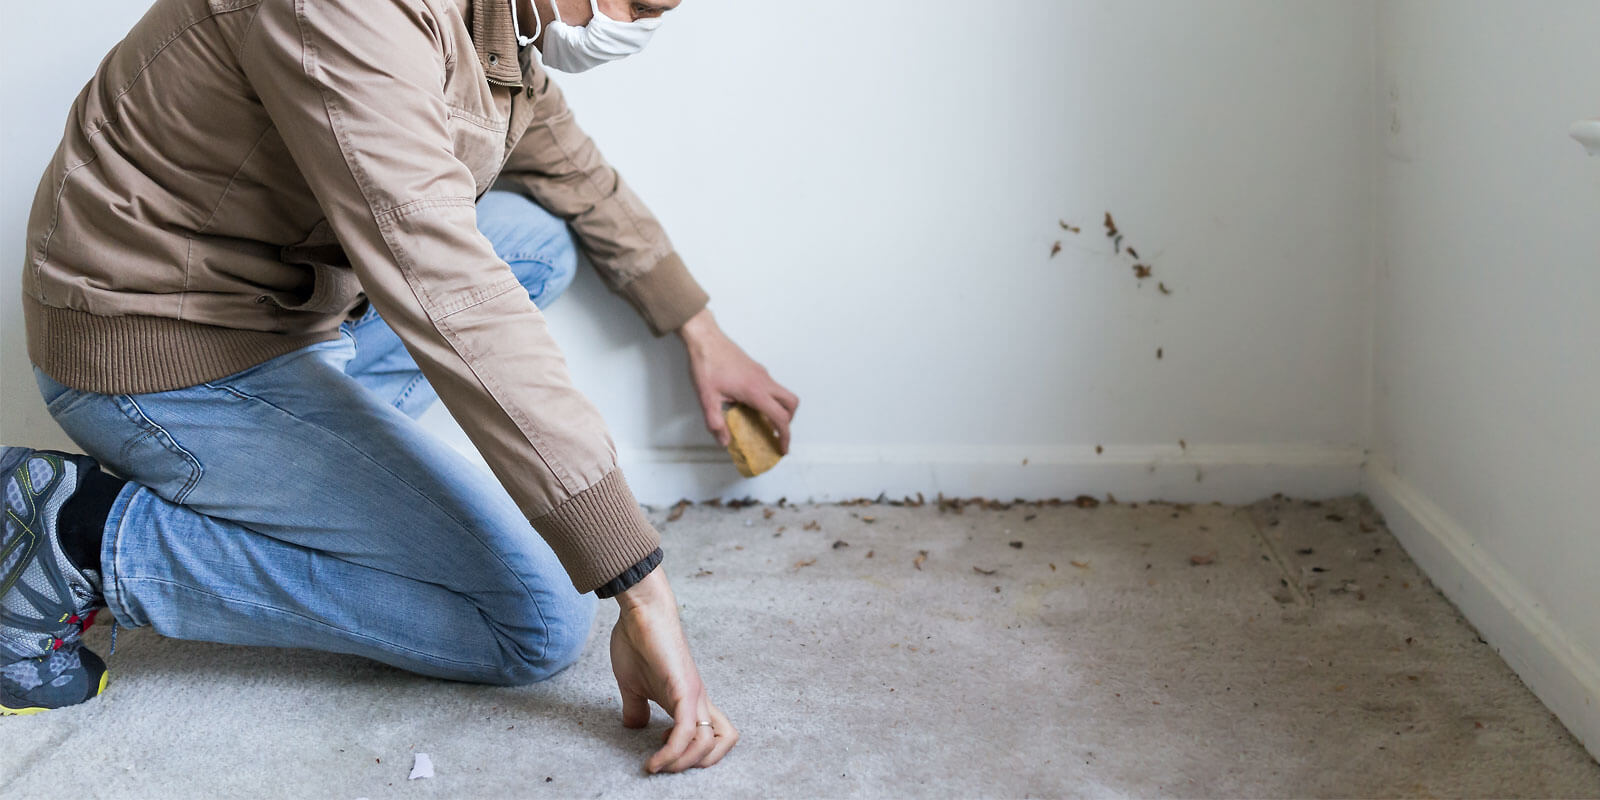 How to Remove Mold from Carpet